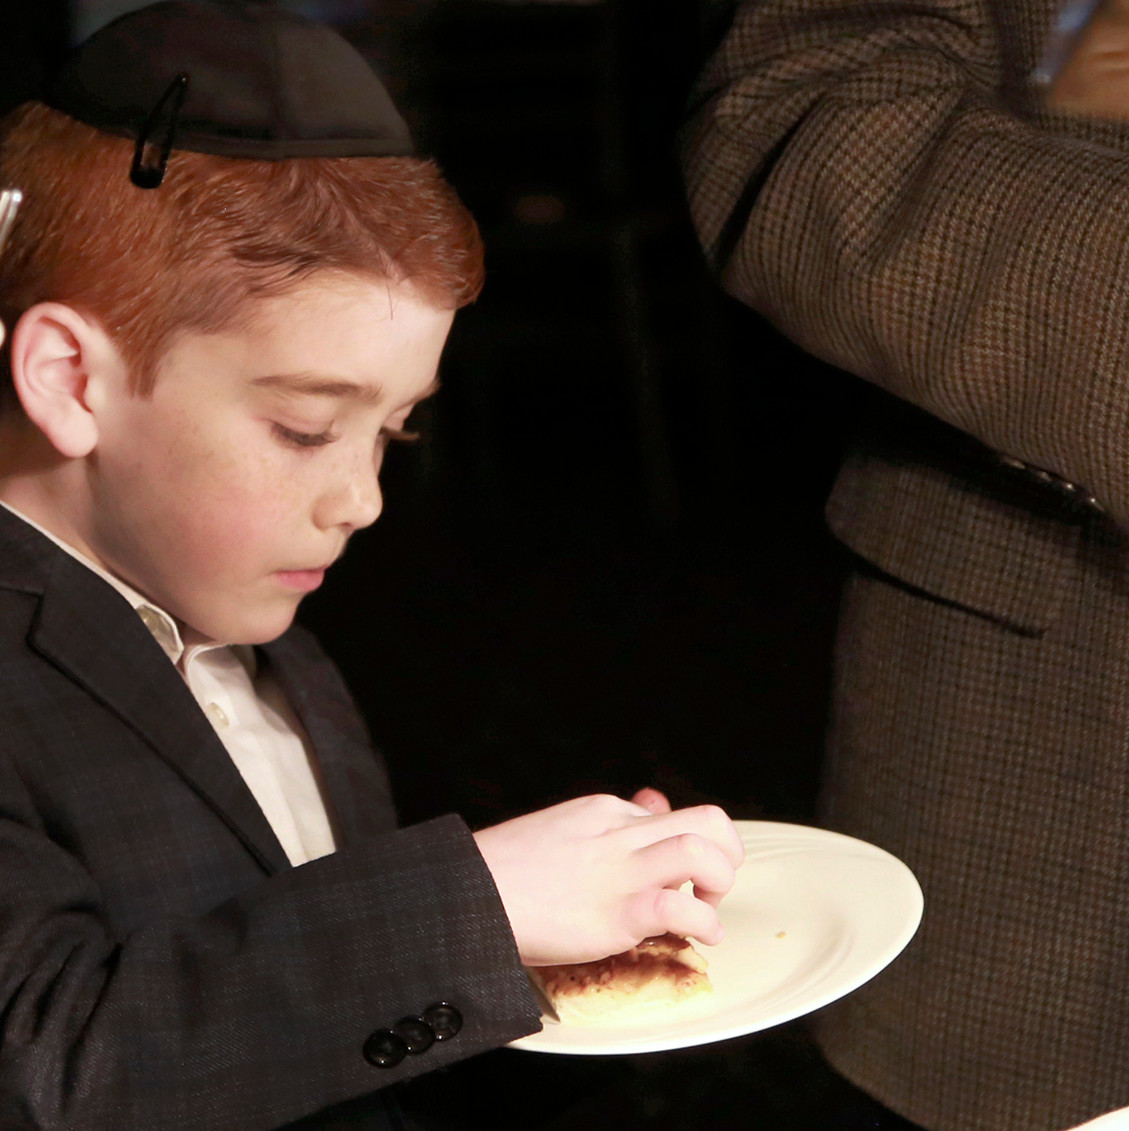 Seven-year old Levi Horshander, son of an awardee, samples focaccia bread.